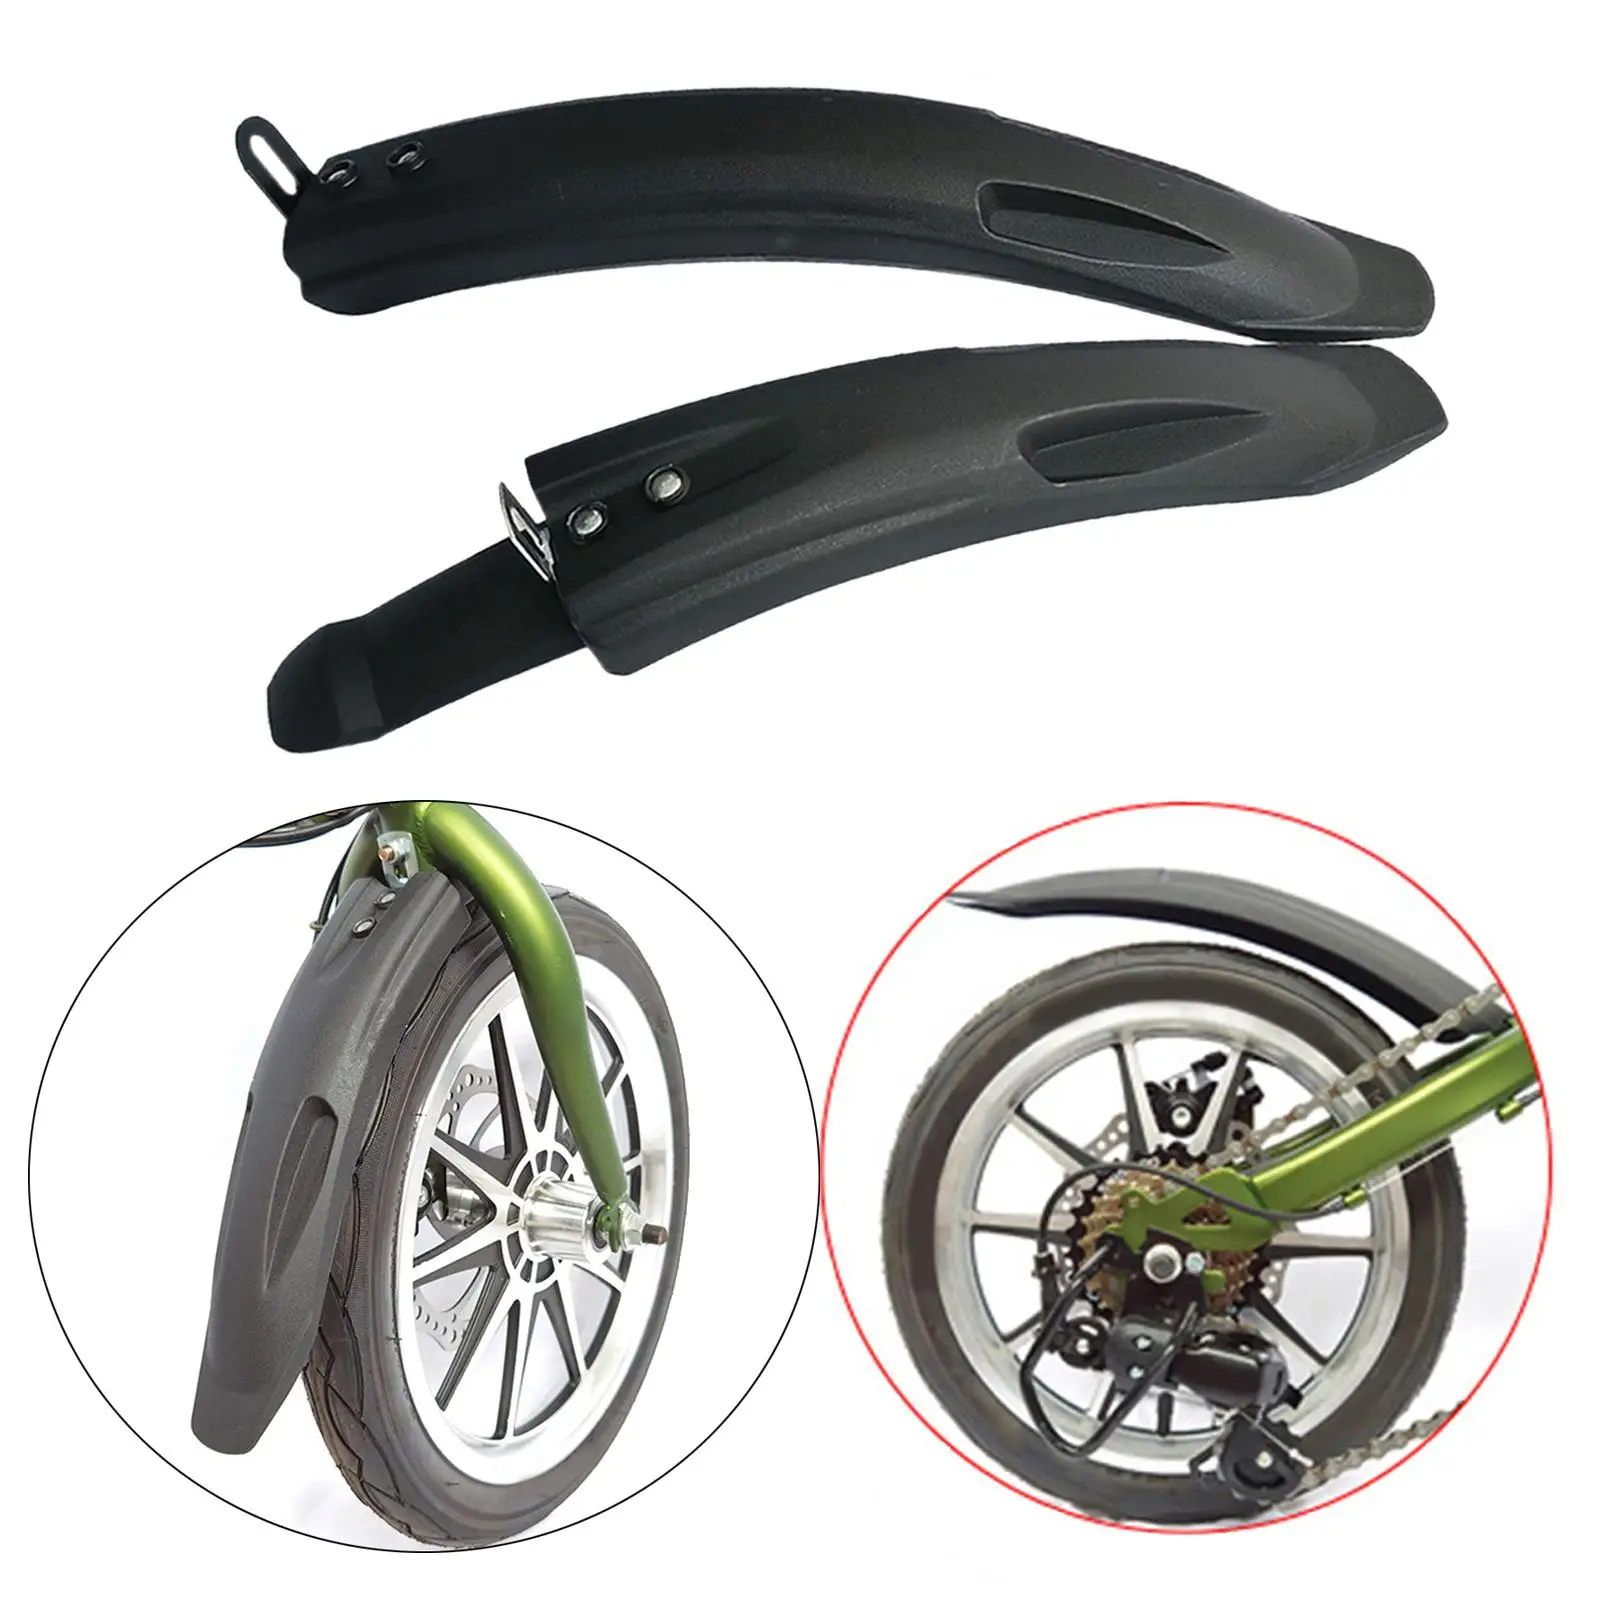 1 Pair Universal 14-18 Inch Bike Universal Fender Tough Mudguard Bicycle Electric Extension Scooter Mudguard For Motorcycle